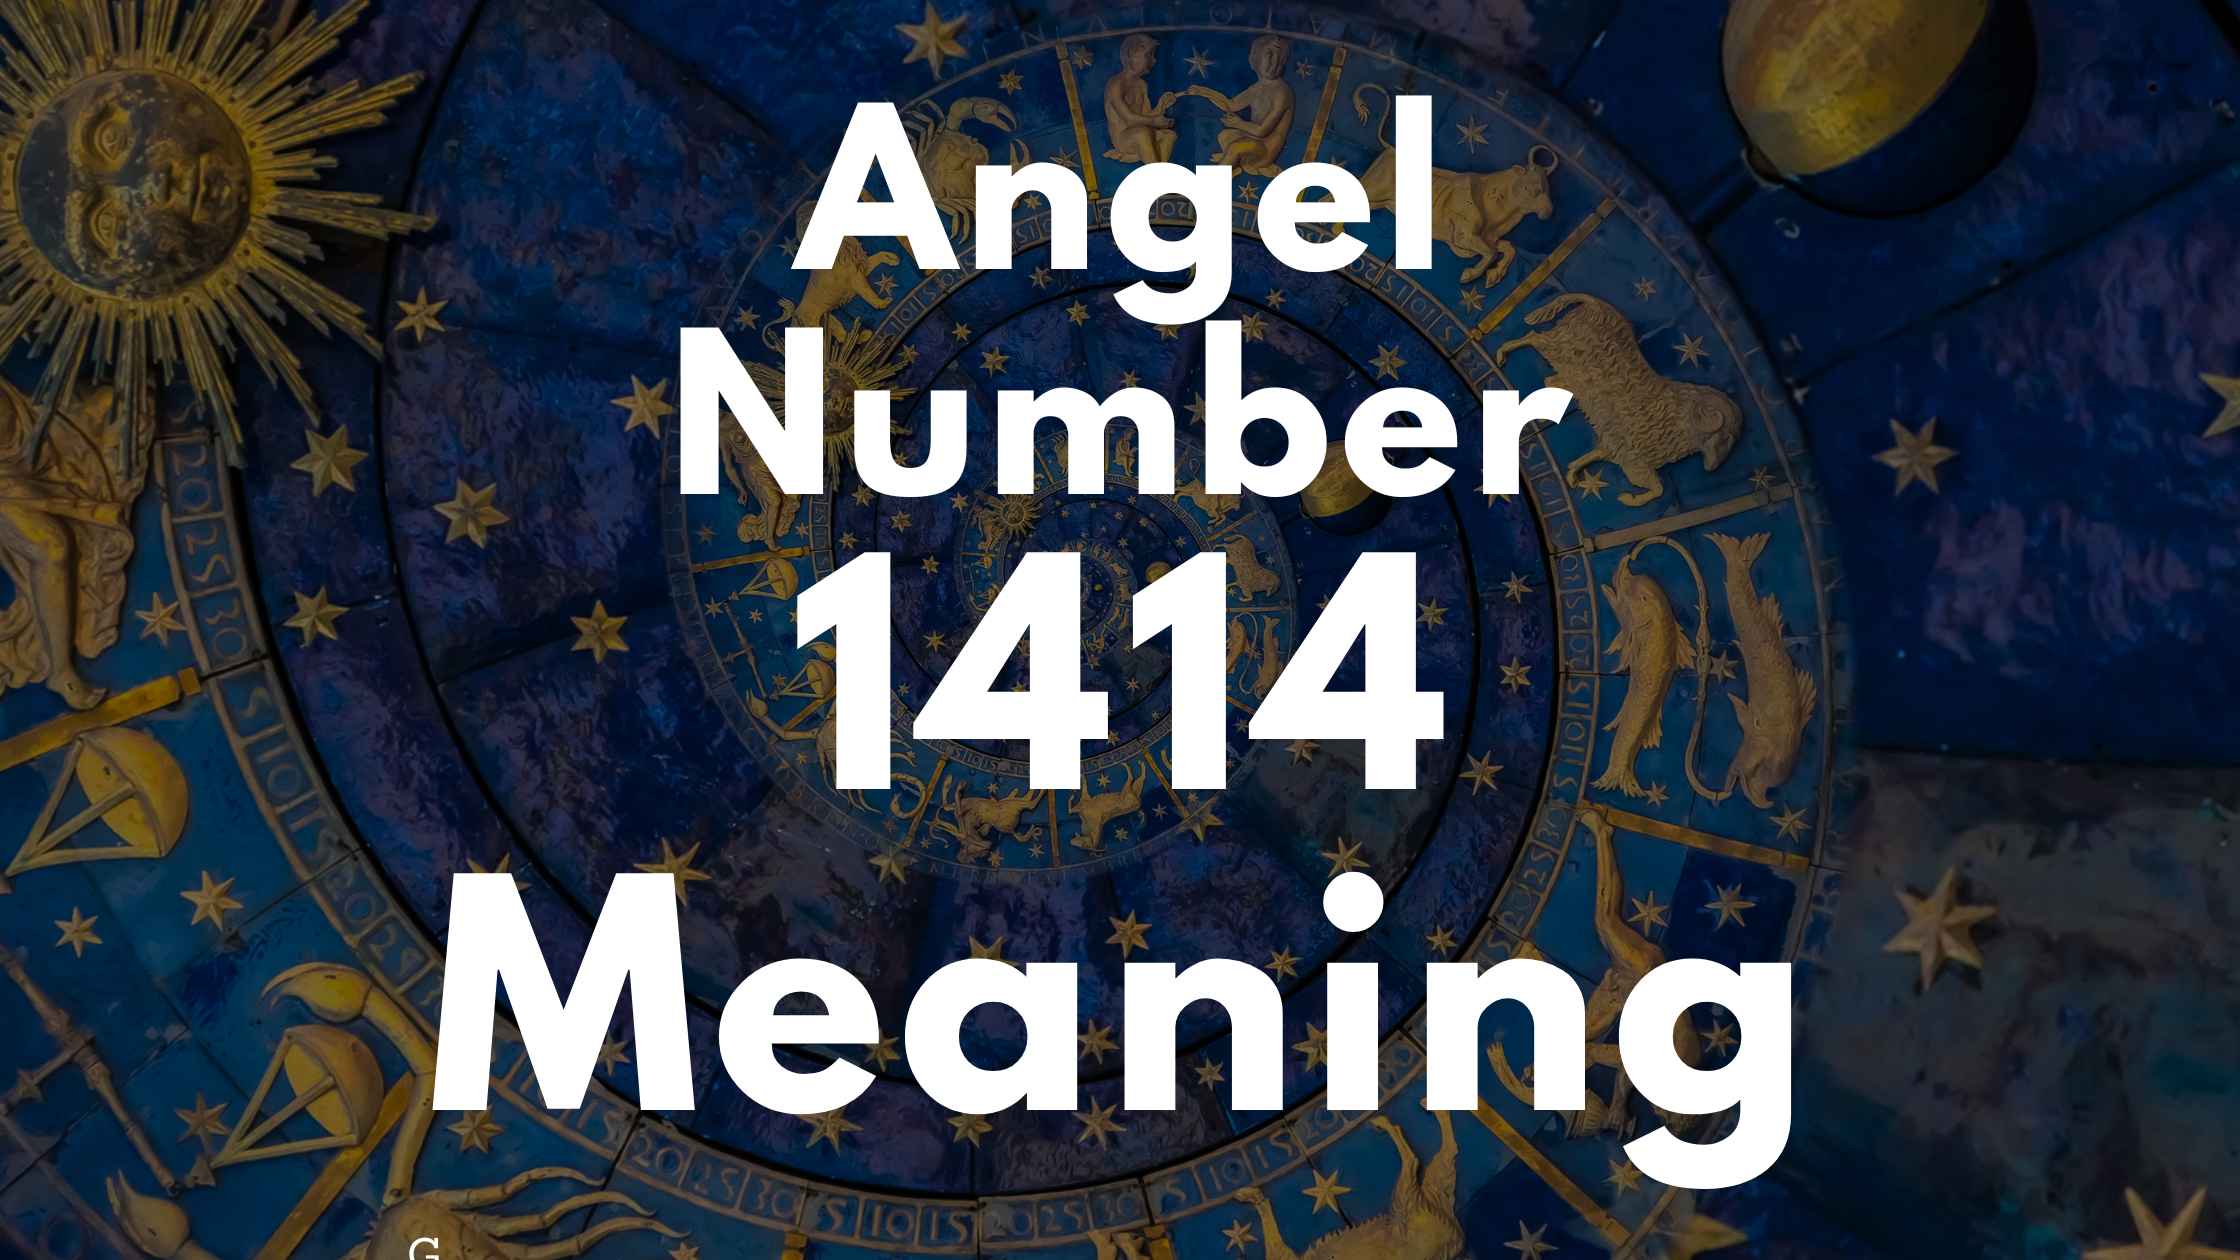 Angel Number 1414 Spiritual Meaning, Symbolism, and Significance